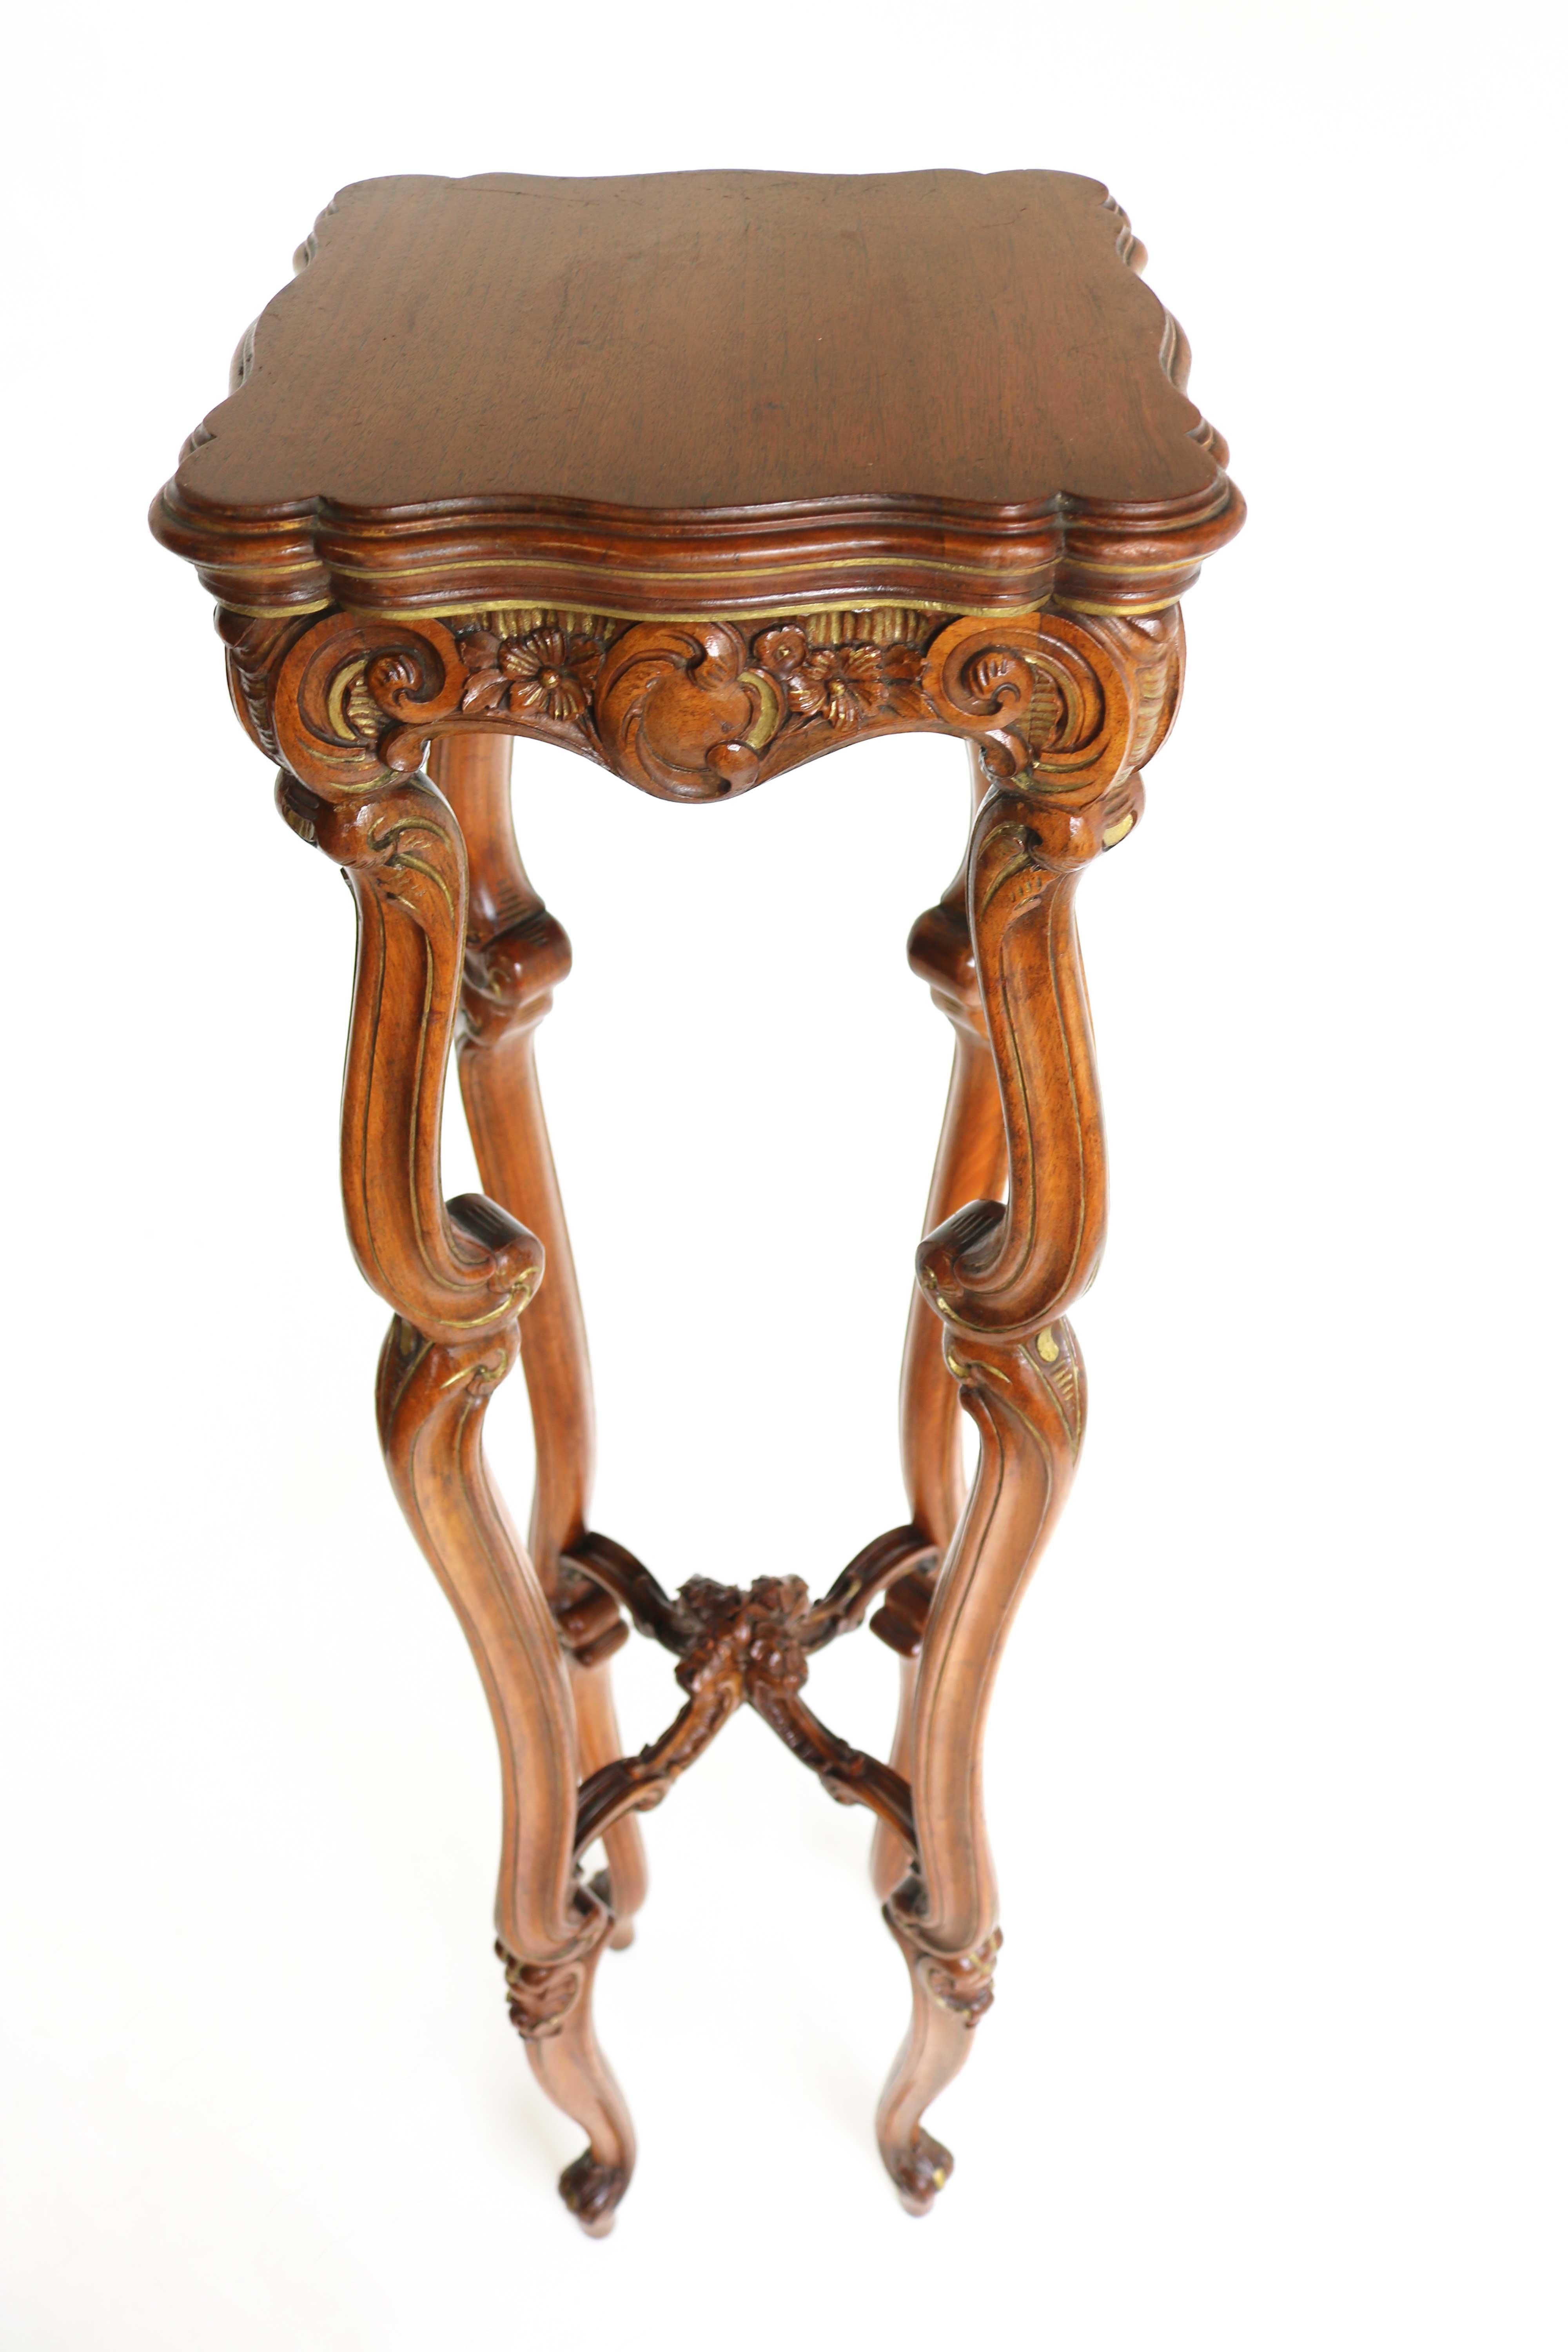 Antique French Louis XV Style Plant Stand, Carved Wood Table, Pedestal ca. 1900 For Sale 5